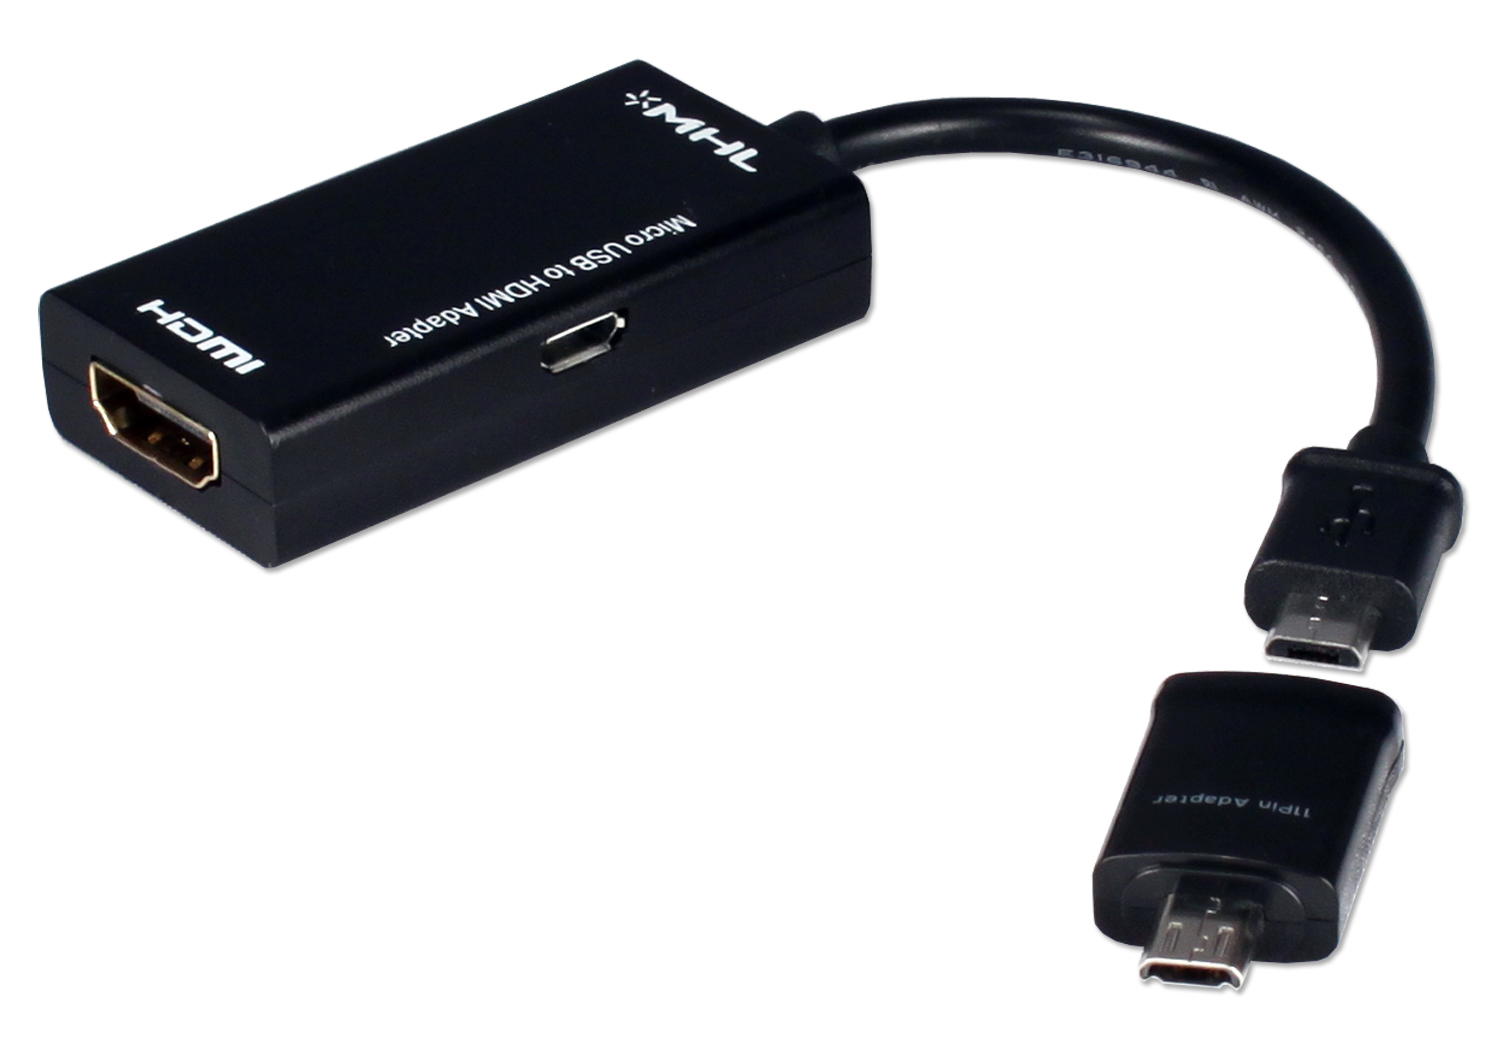 MHL-HD MHL Micro-USB Converter Kit with to 11-Pin Adapter